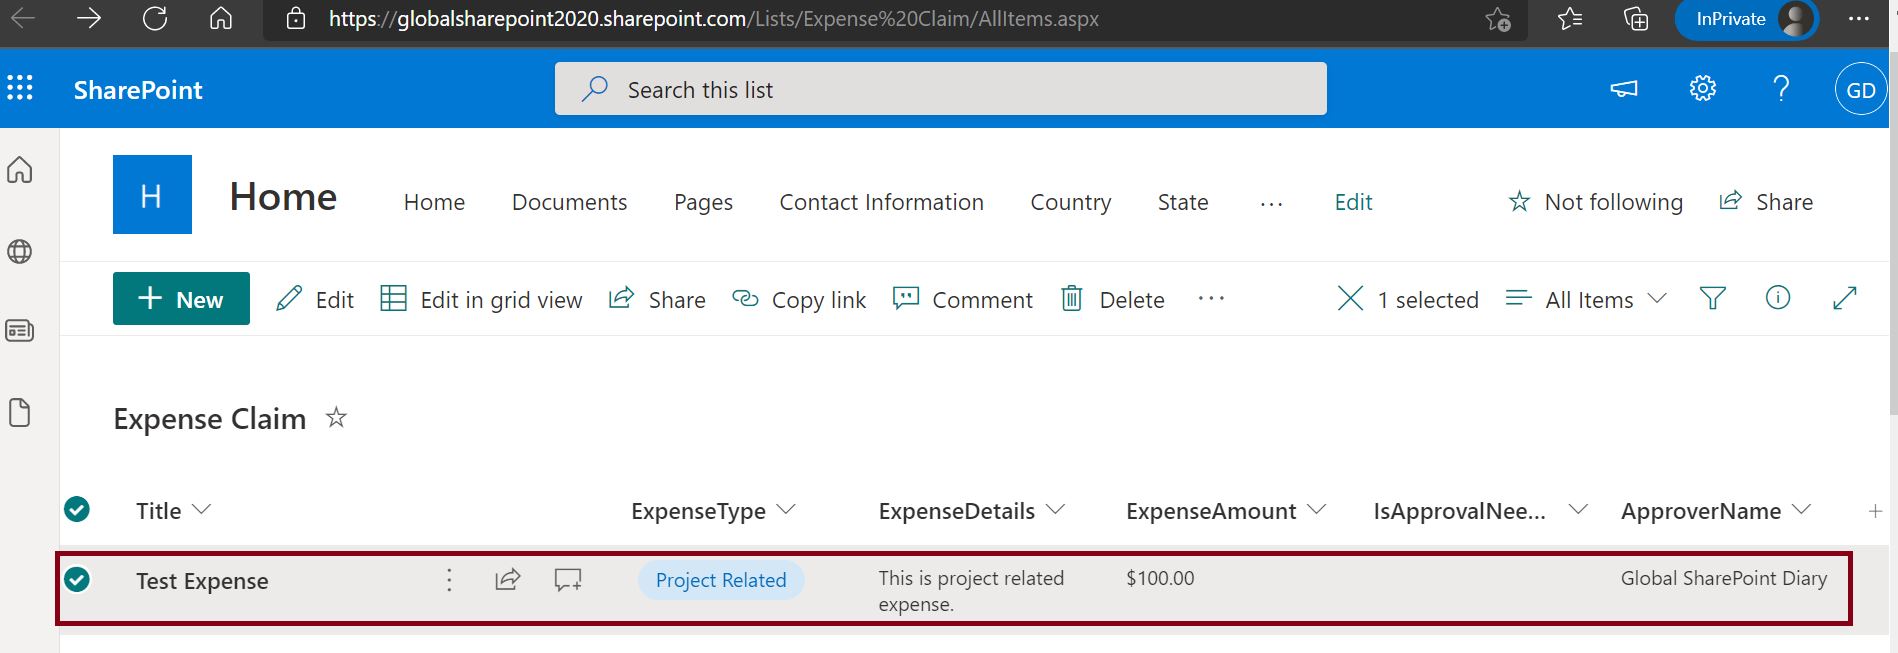 Show Hide Columns conditionally demo with the sample SharePoint list